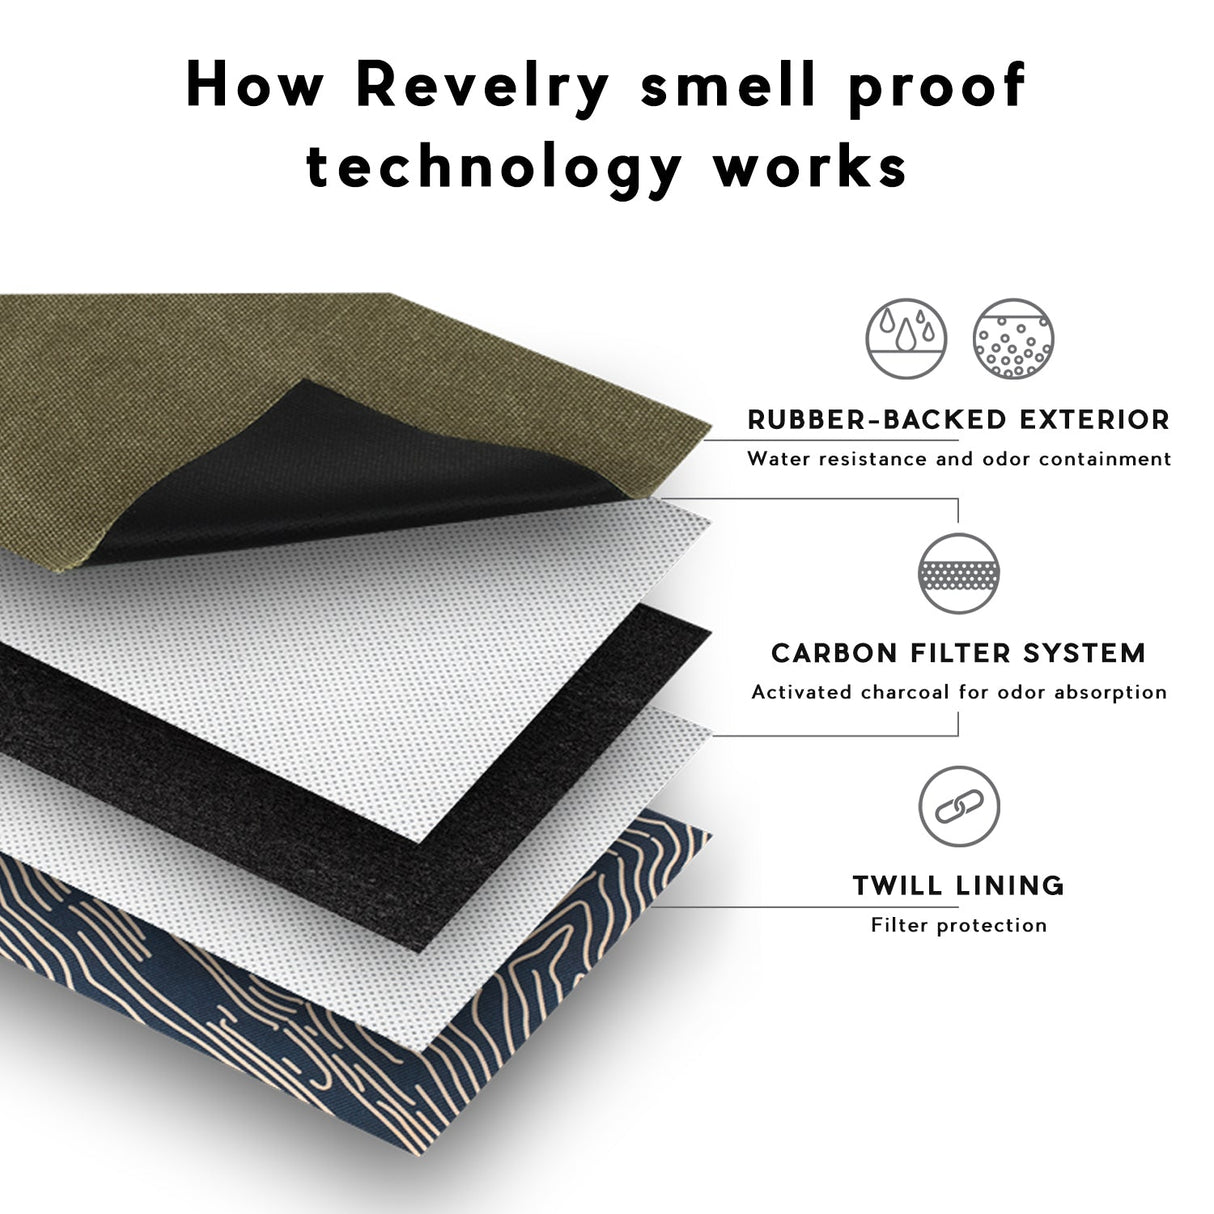 Revelry Supply's The Gordito - Smell Proof Padded Pouch materials explained with icons